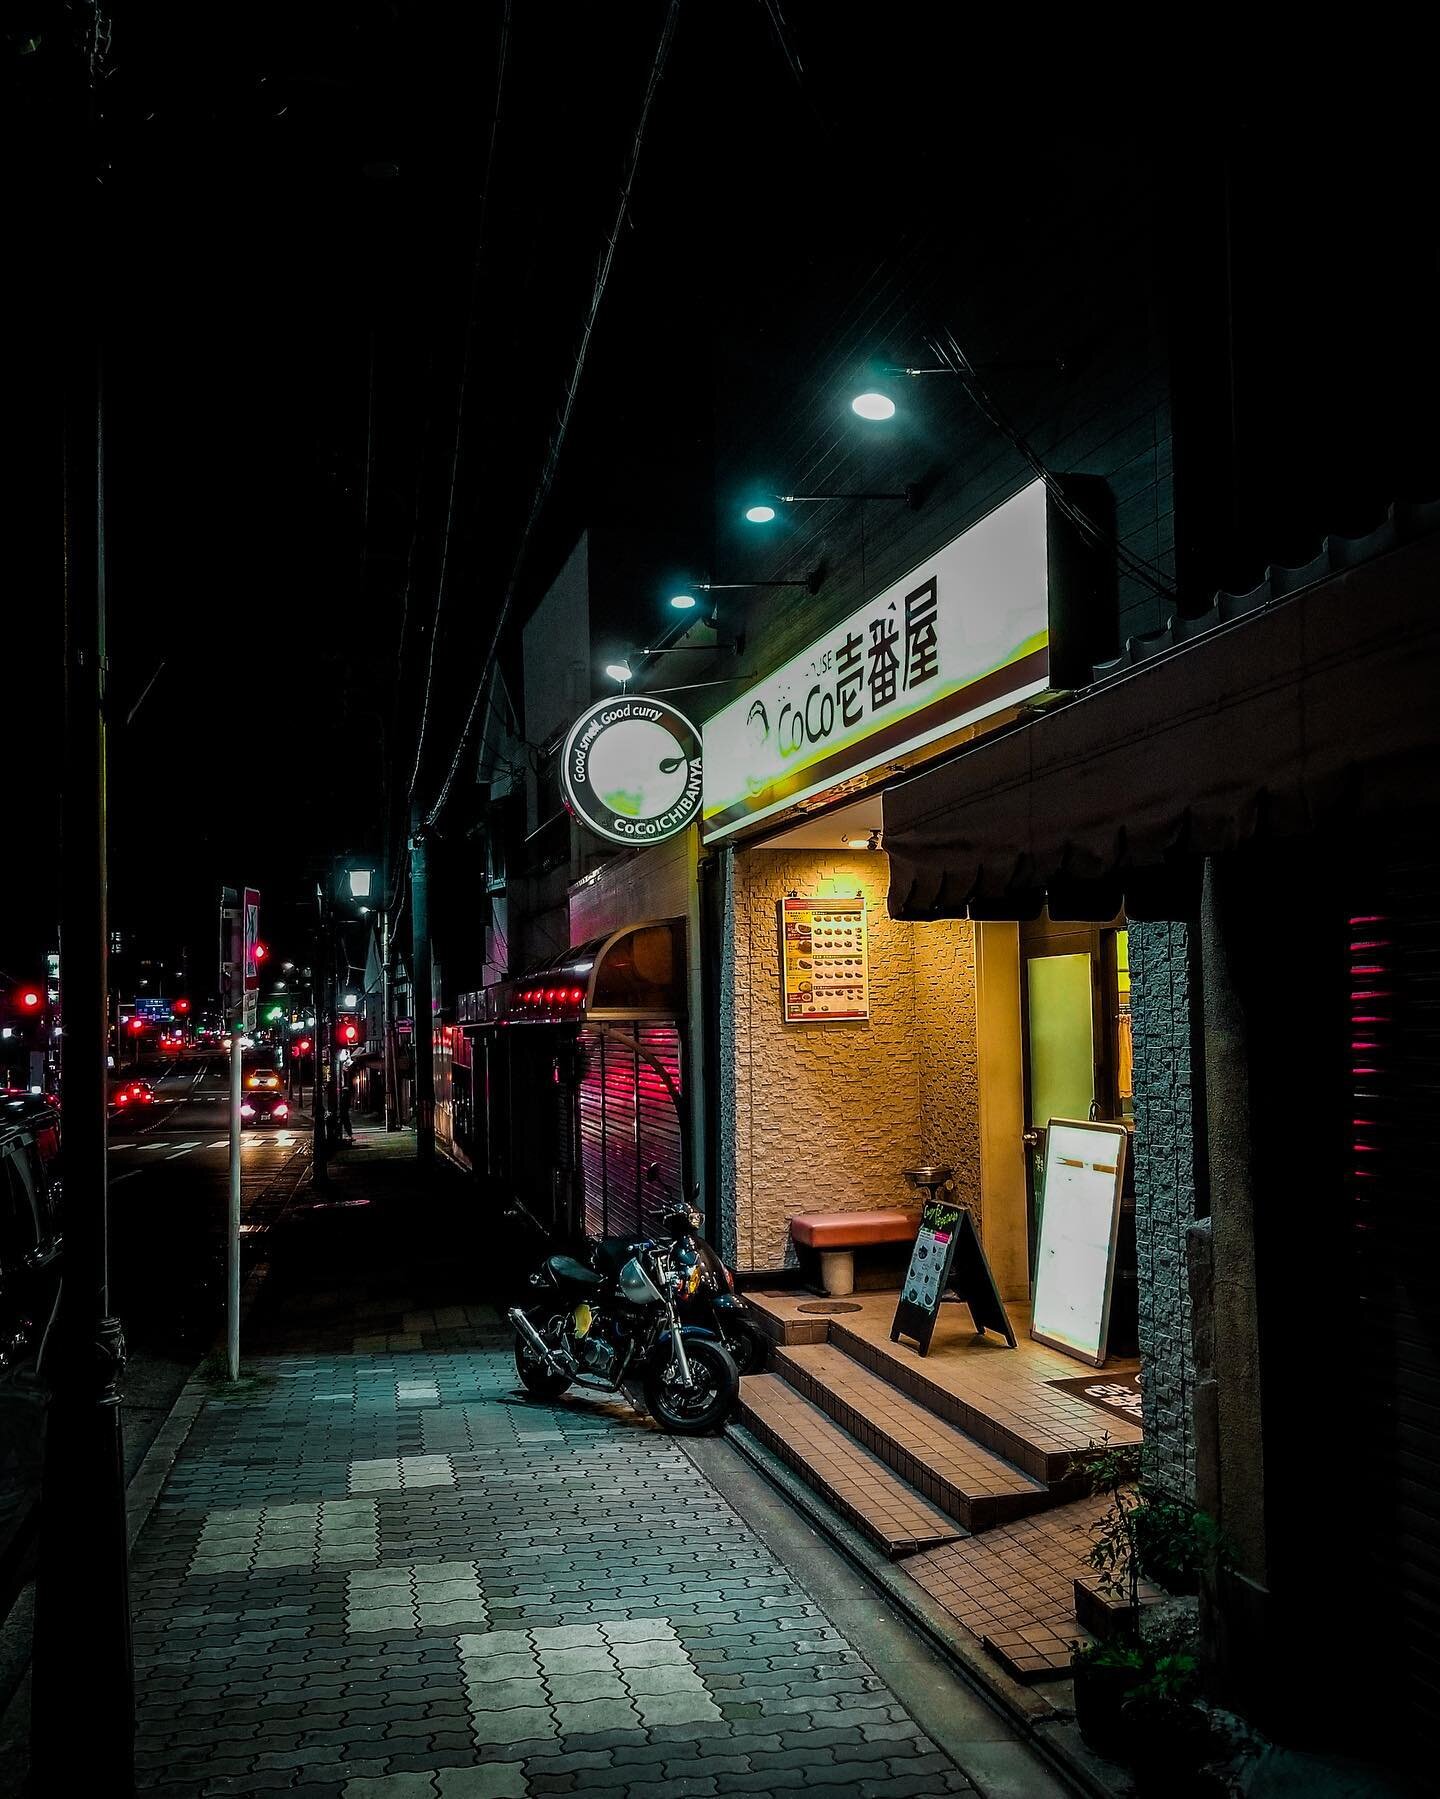 From the archive: looking through pictures from when we could still travel. Japan was one the best experiences I&rsquo;ve had. This was taken walking around Kyoto in the middle of the night. 
#kyoto #japan #citiesatnight #moodedits #walksatnight #urb